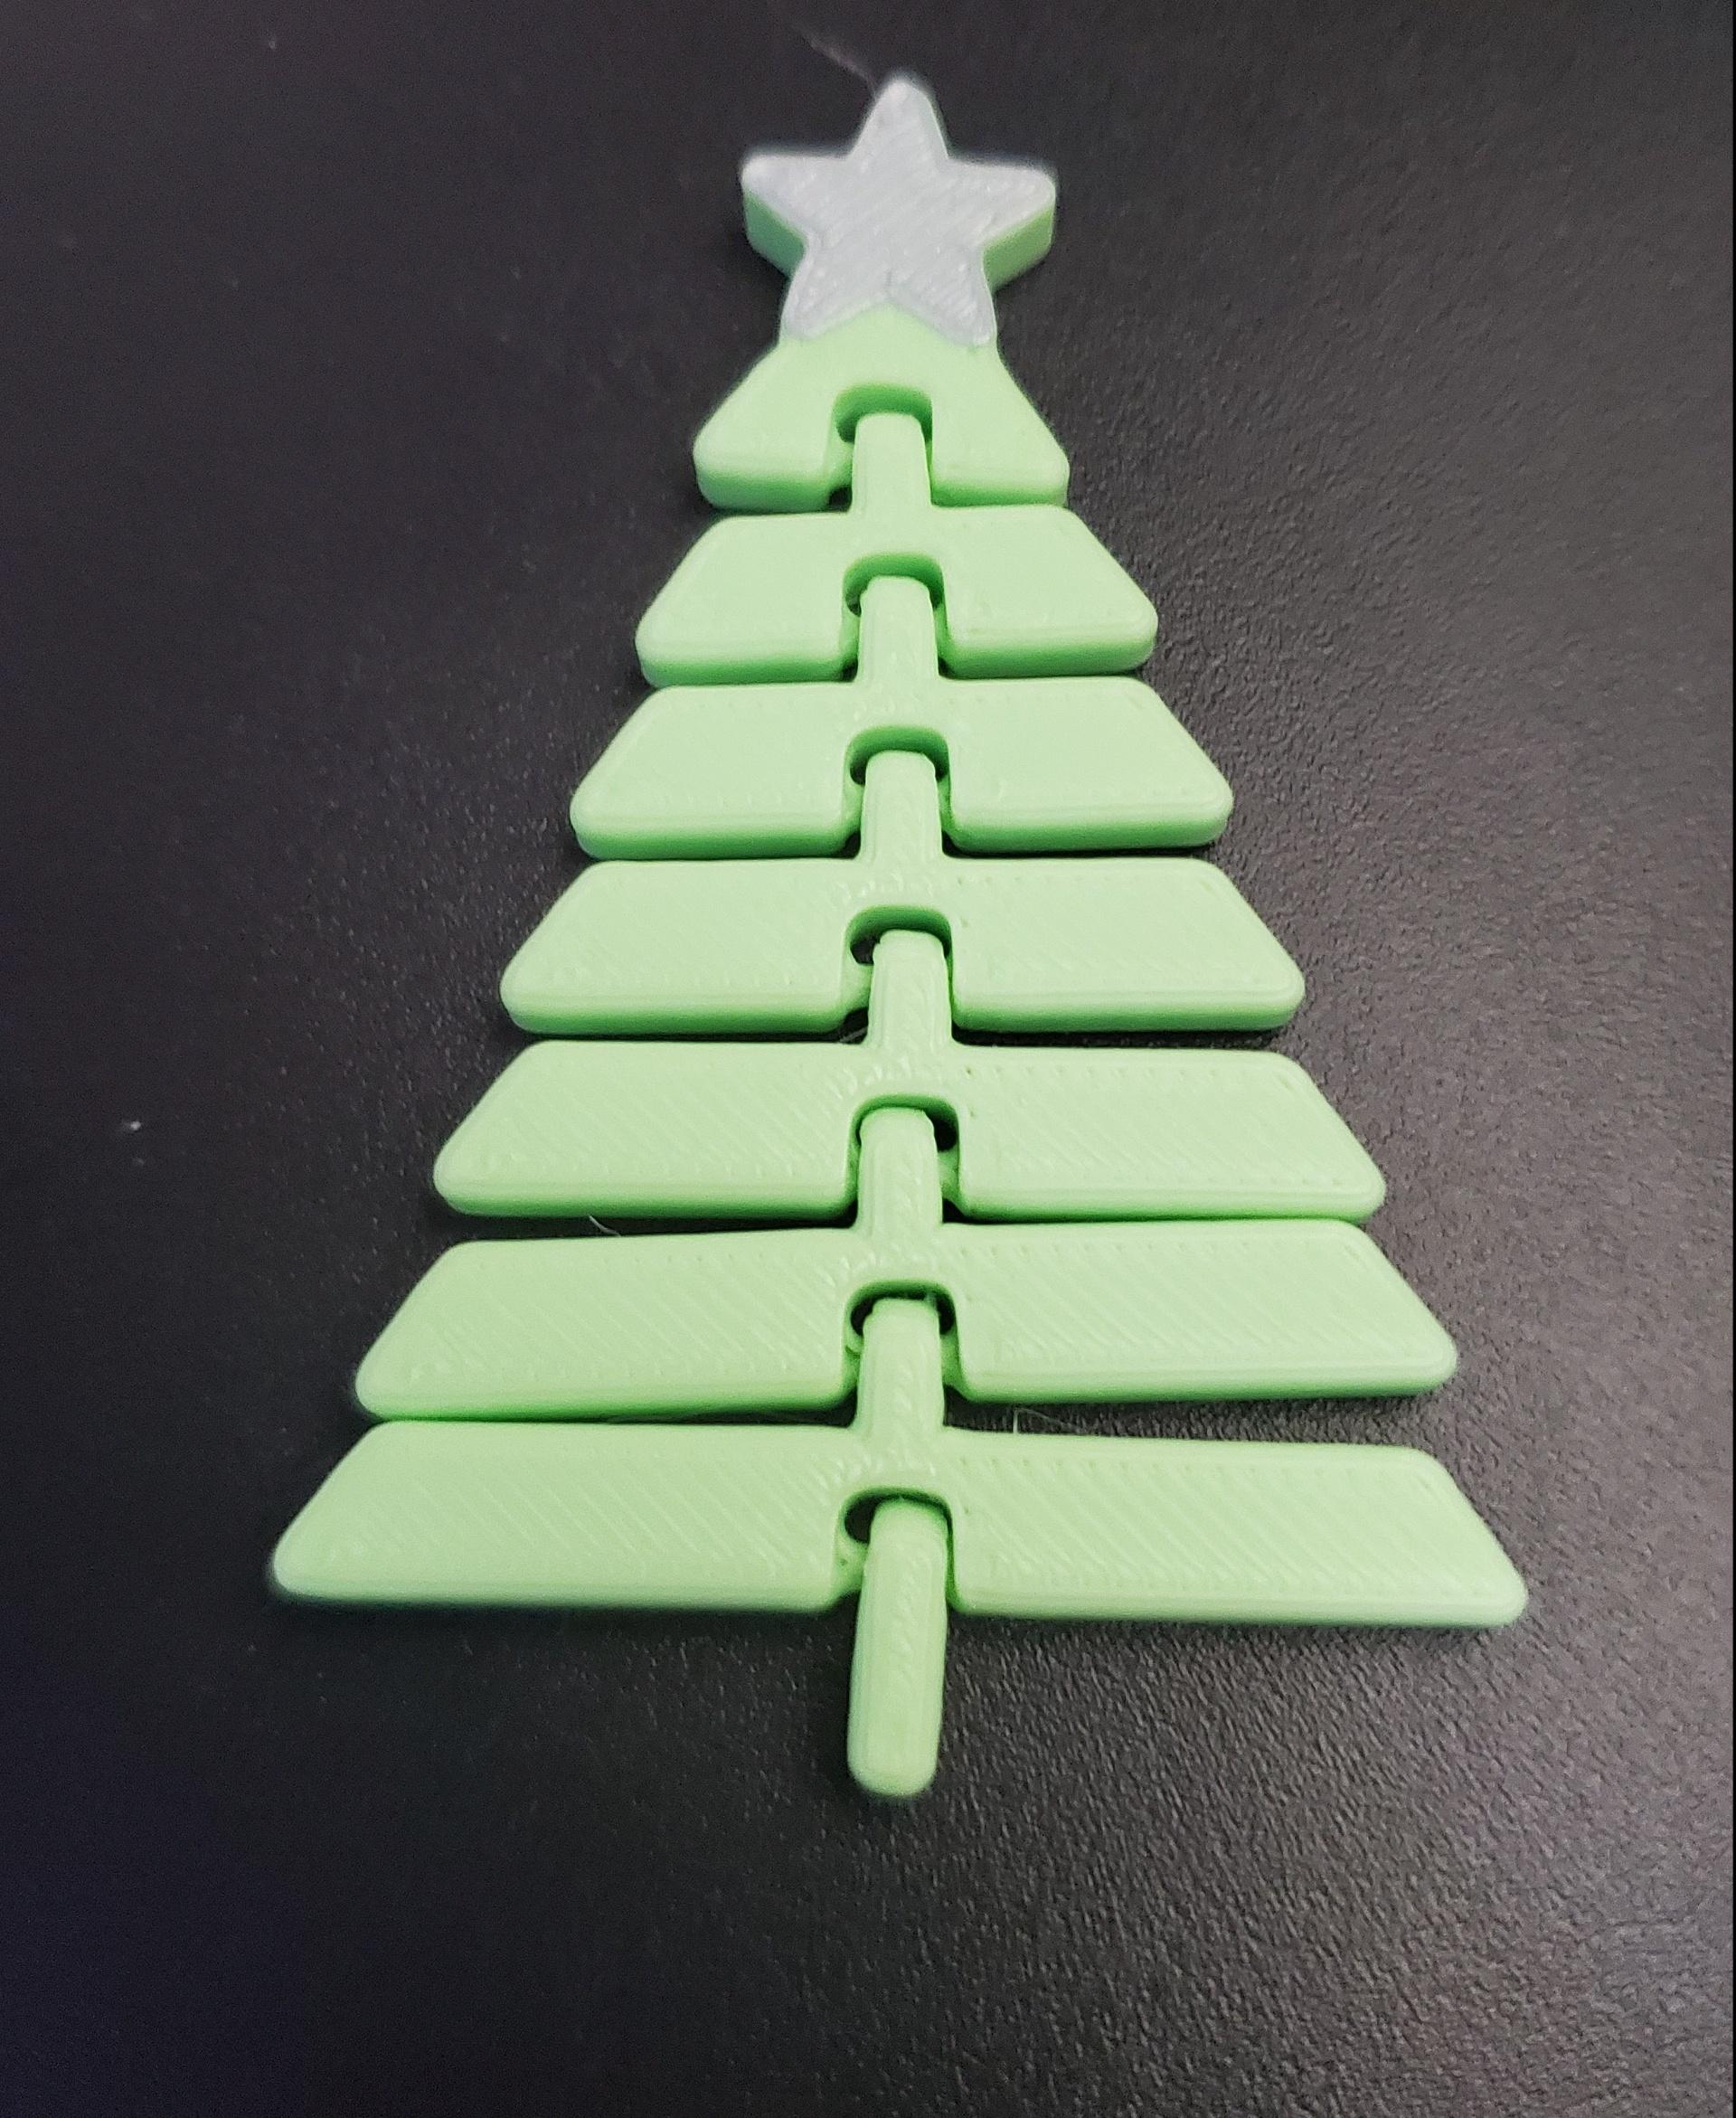 Articulated Christmas Tree with Star - Print in place fidget toy - 3mf - polymaker pla pro light green - 3d model